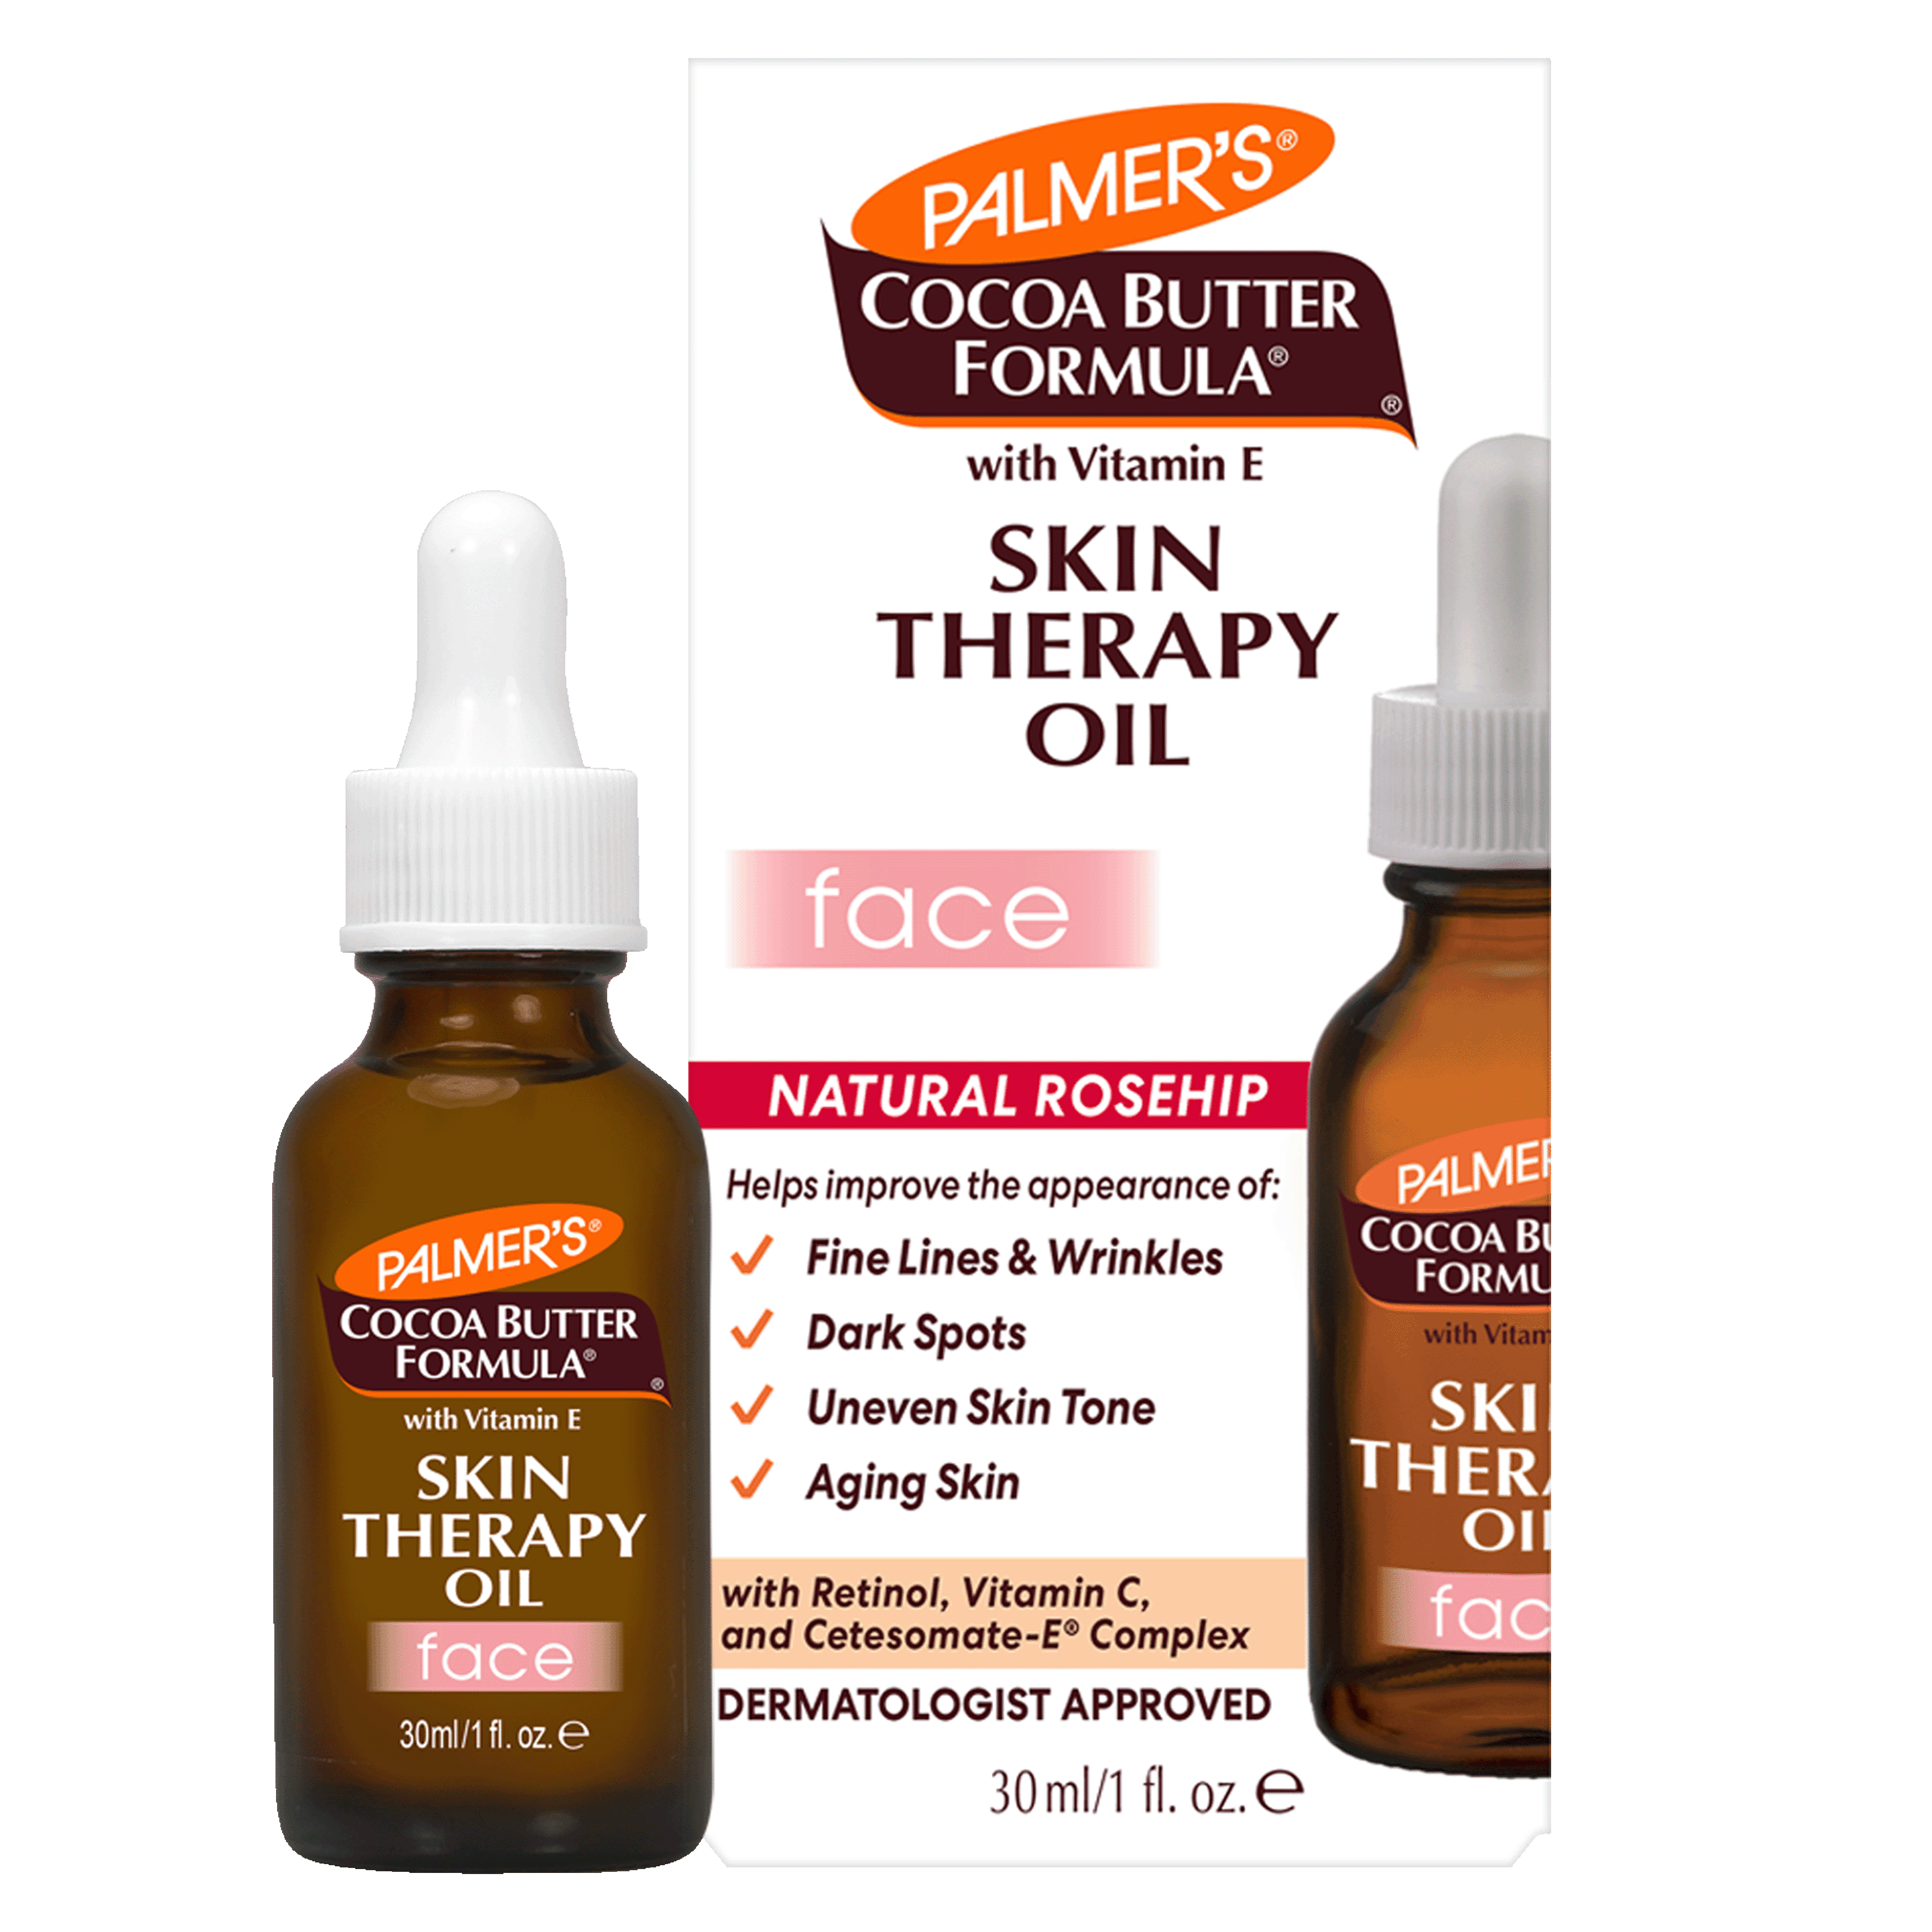 Palmer's Skin Therapy Oil - Face Reviews - beautyheaven